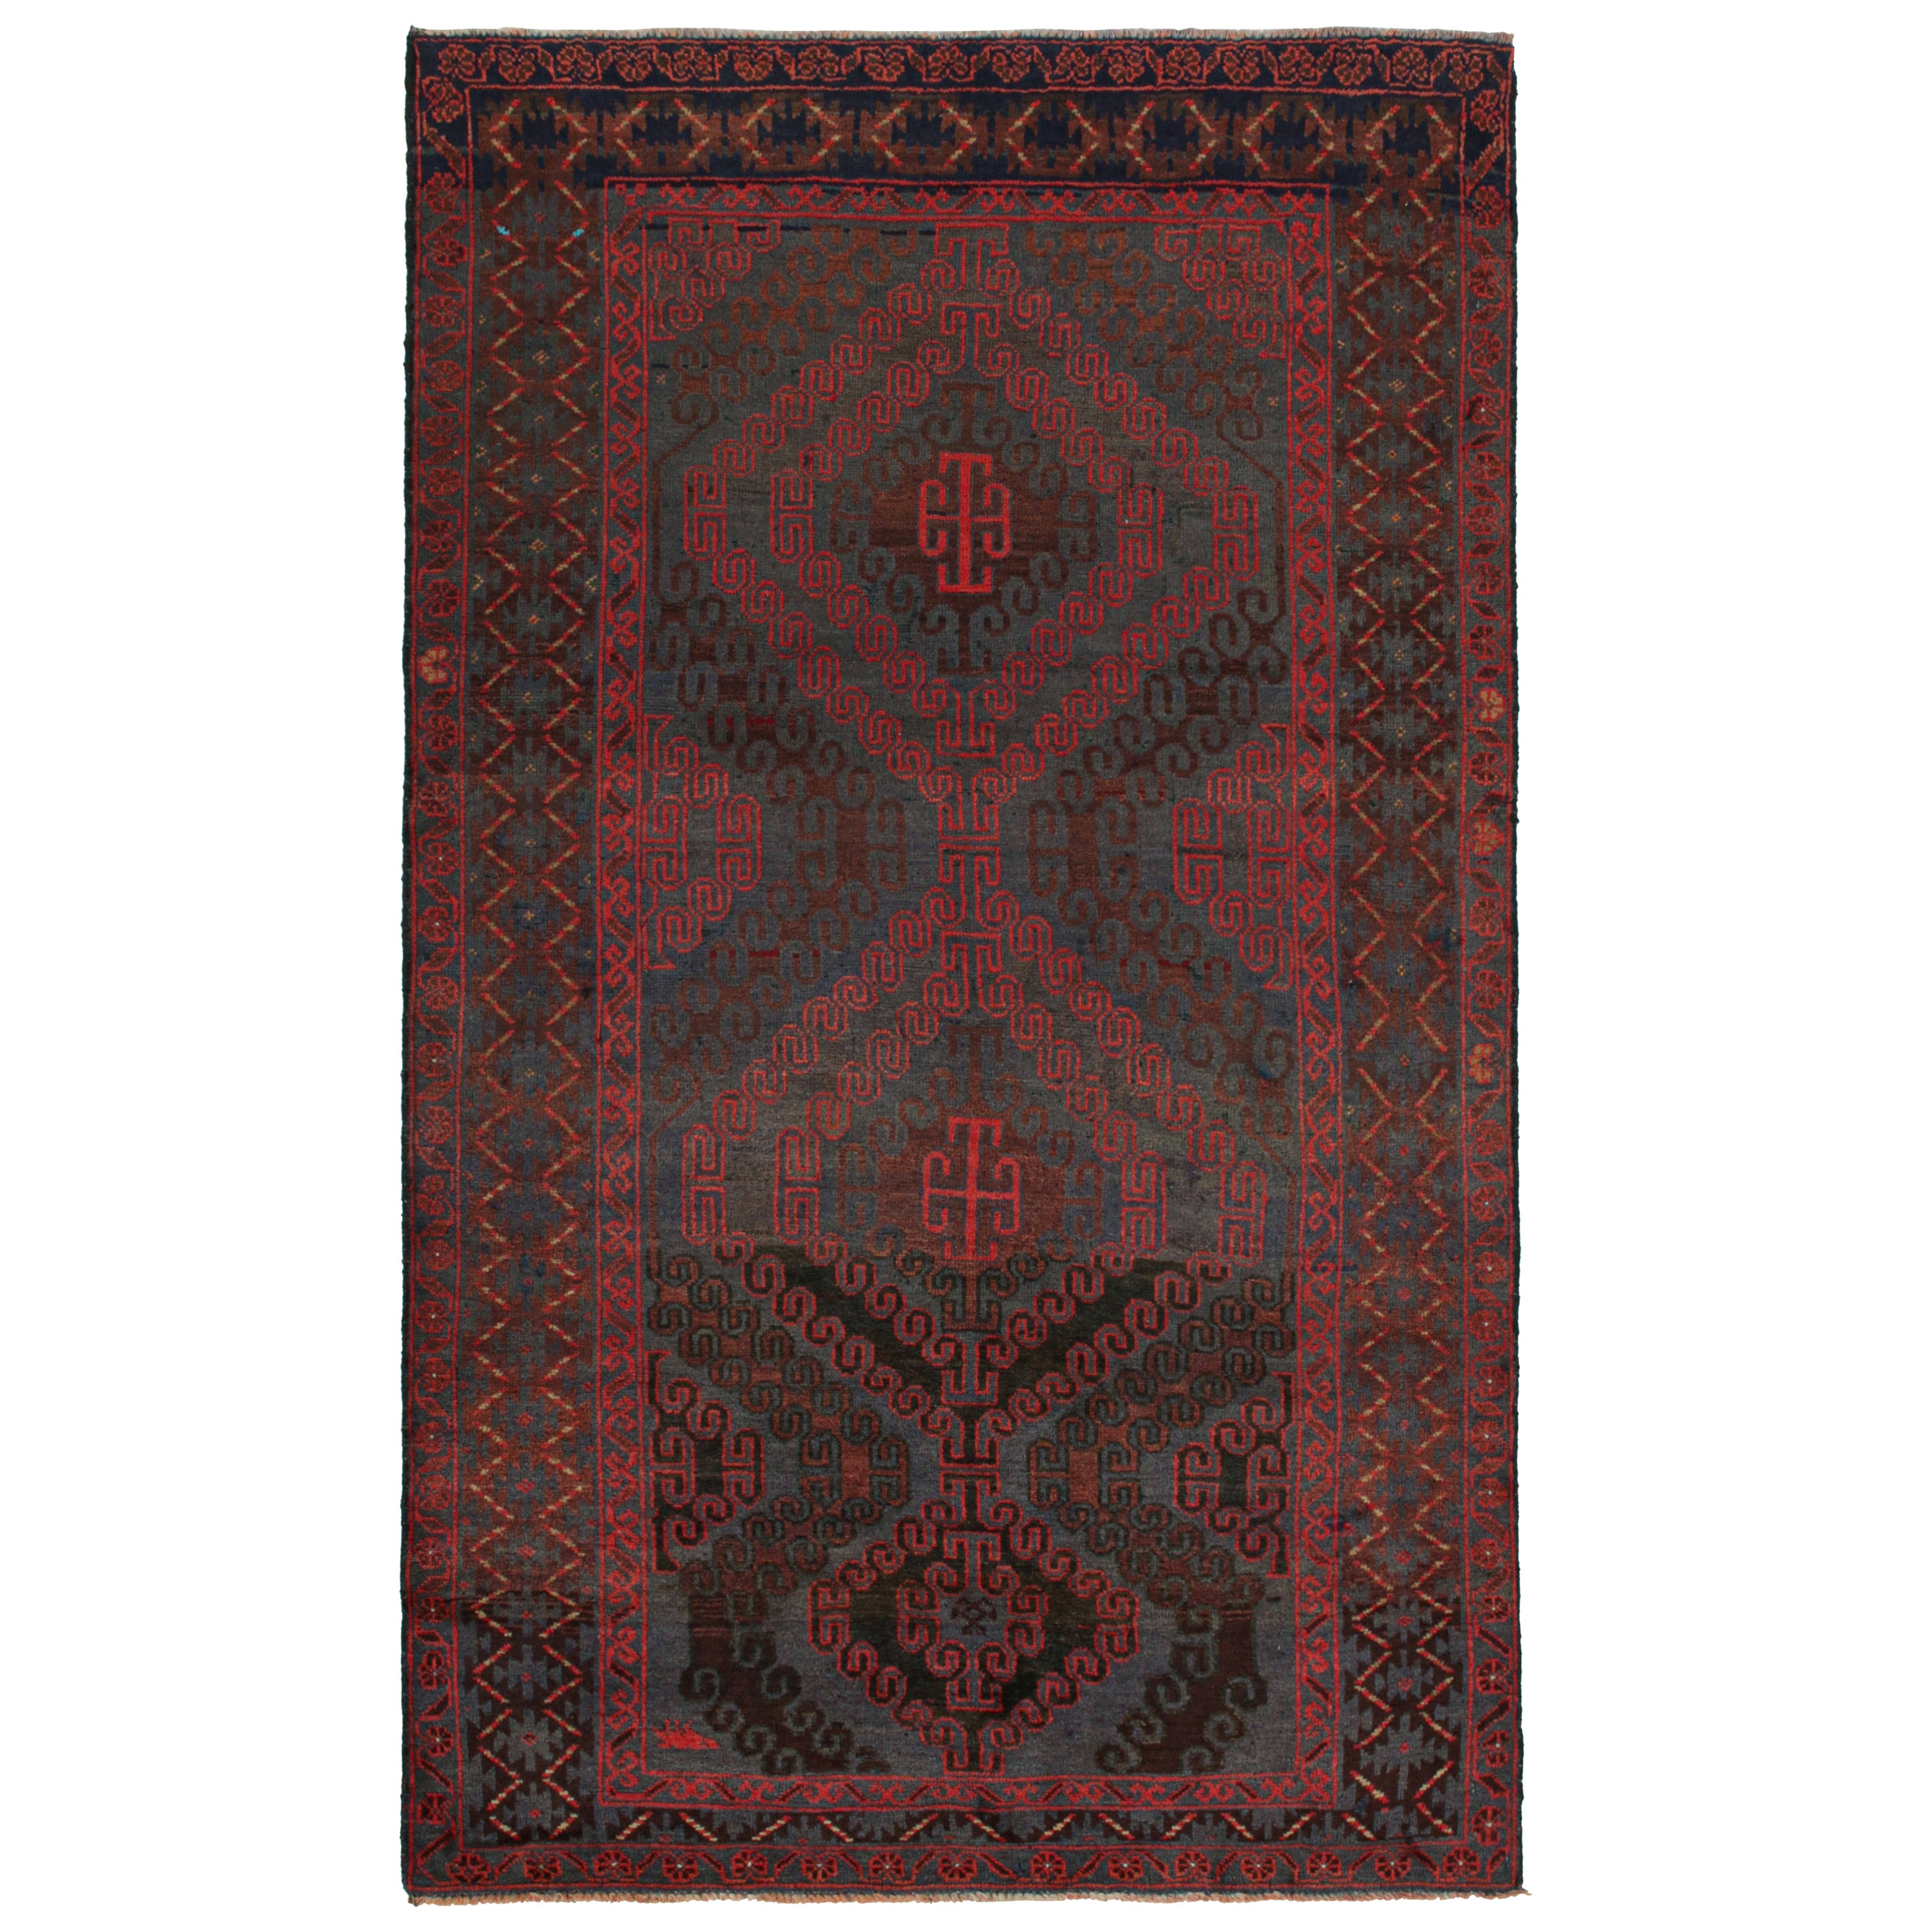 Vintage Baluch Tribal Rug in Red, Blue & Brown Patterns from Rug & Kilim